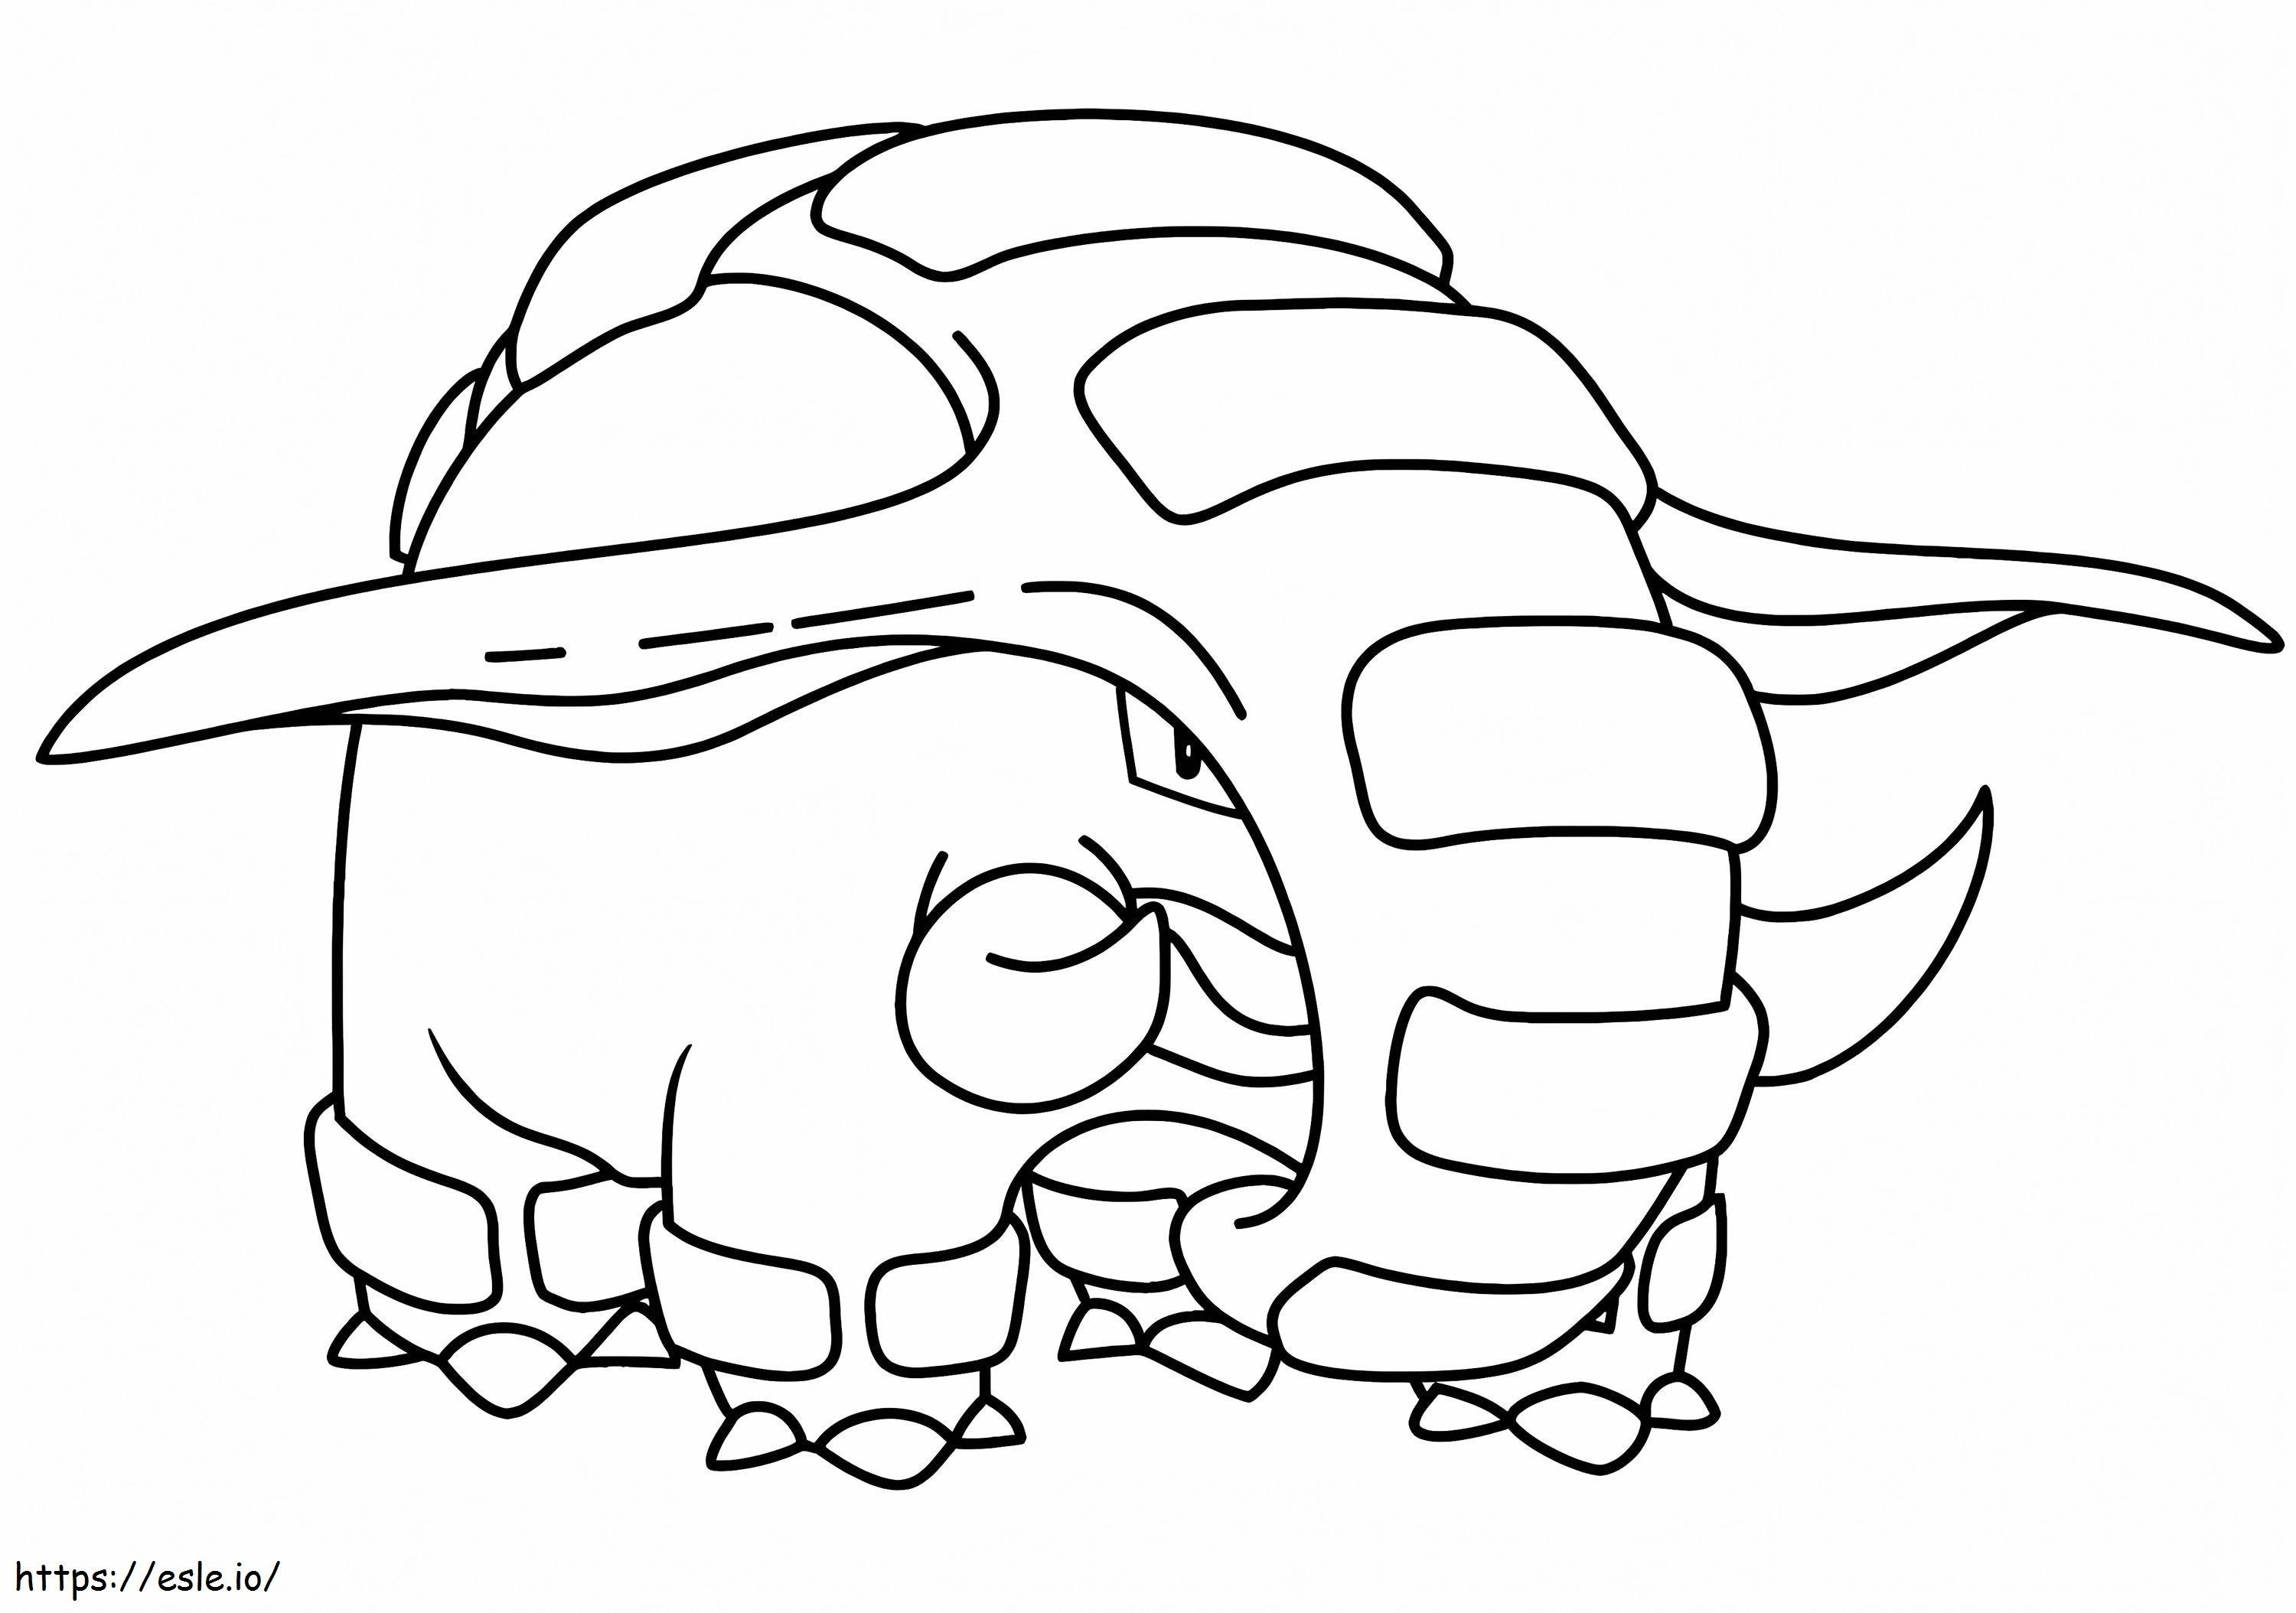 Pokemon Donphan coloring page